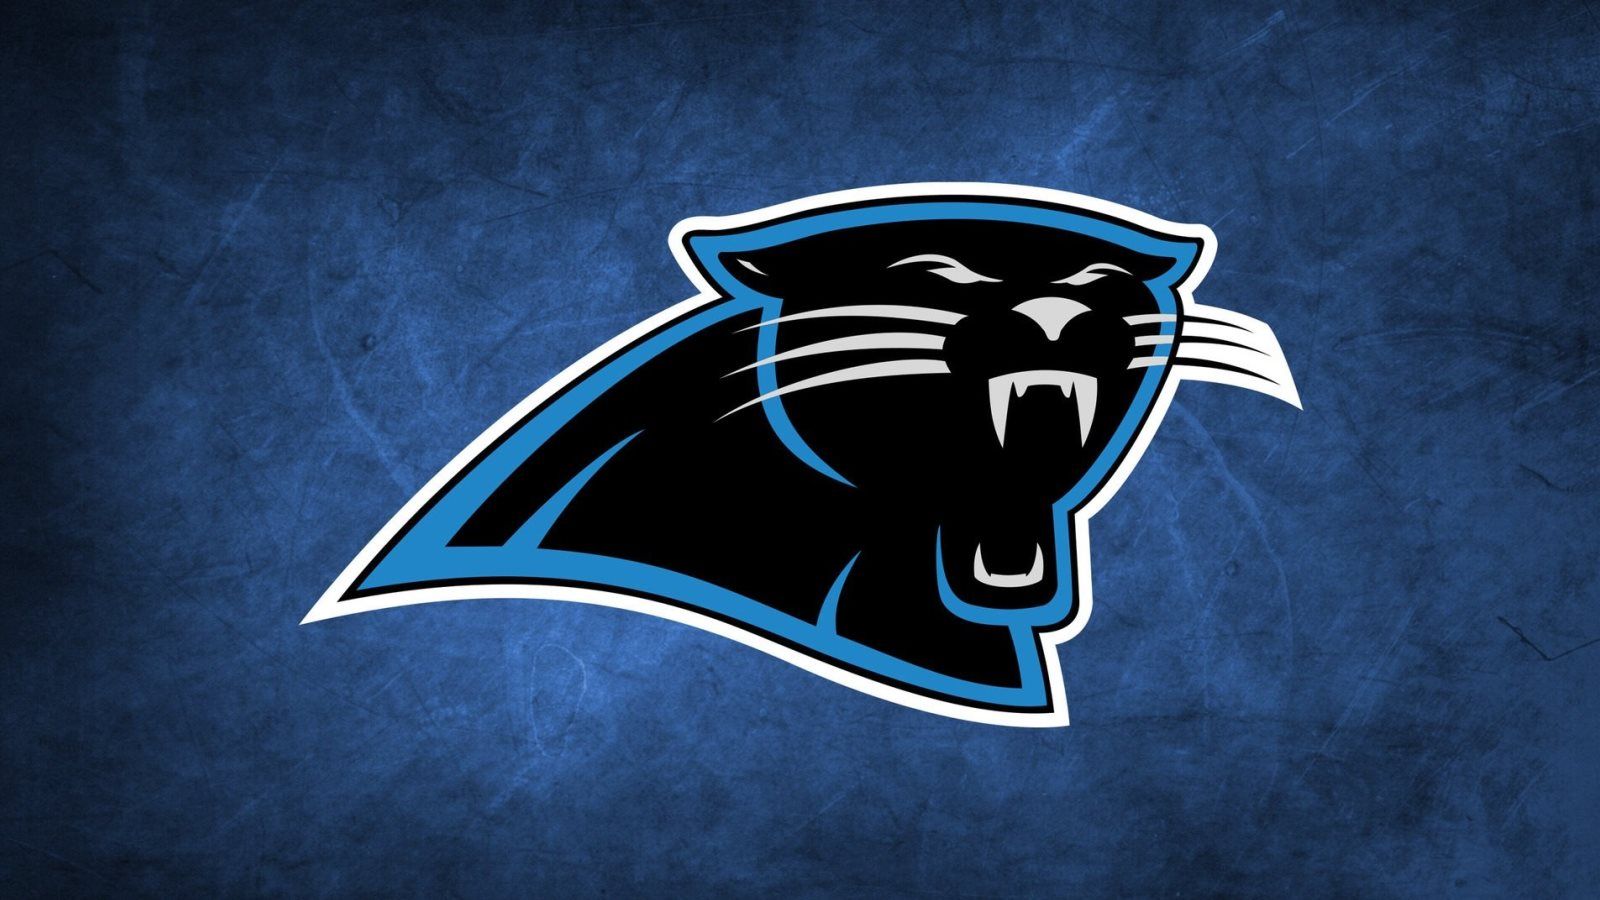 logo-panthers-wallpapers-carolina-packers-wallpaper-green-pictures-widescreen.jpg